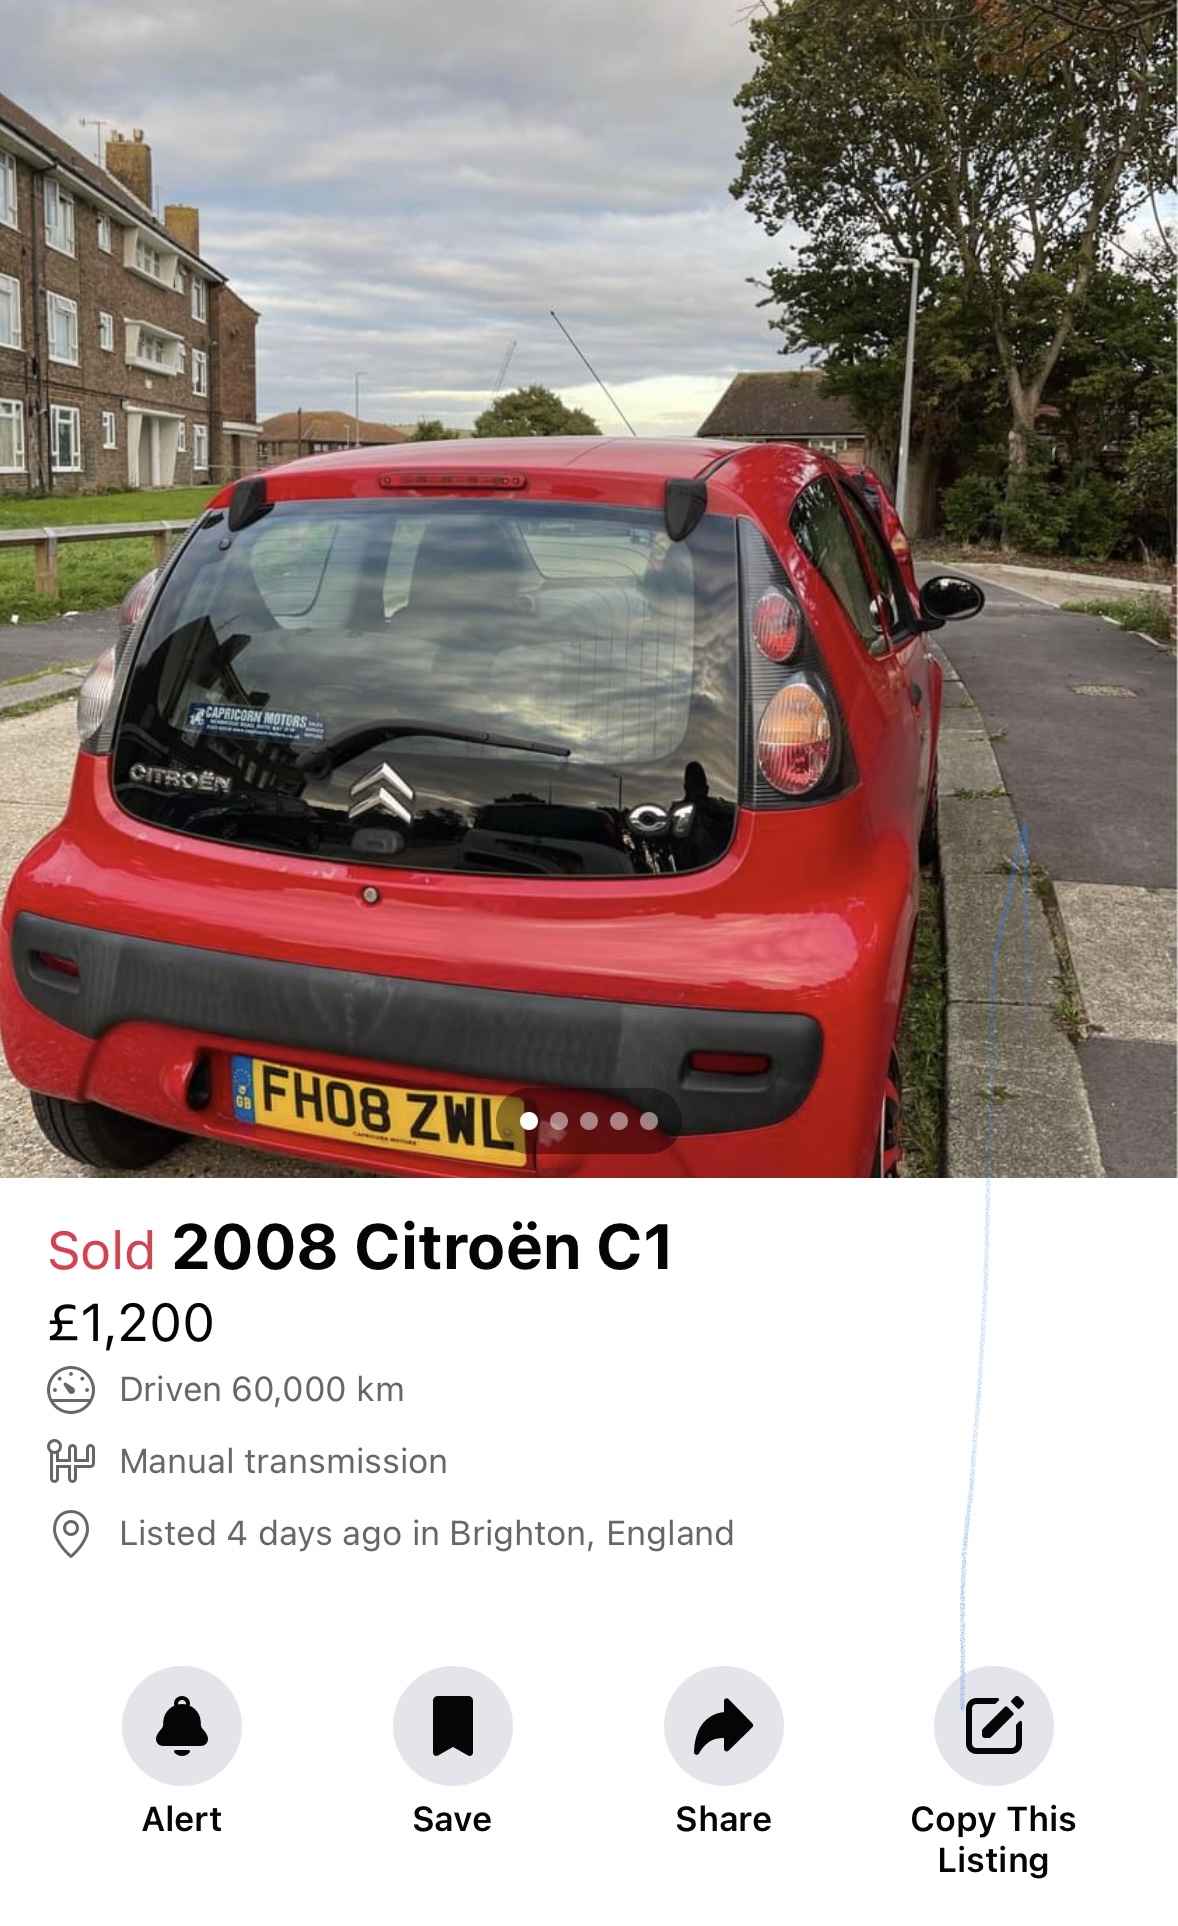 Photograph of FH08 ZWL - a Red Citroen C1 parked in Hollingdean by a non-resident and stored here whilst a dodgy car dealer attempts to sell it. The first of five photographs supplied by the residents of Hollingdean.